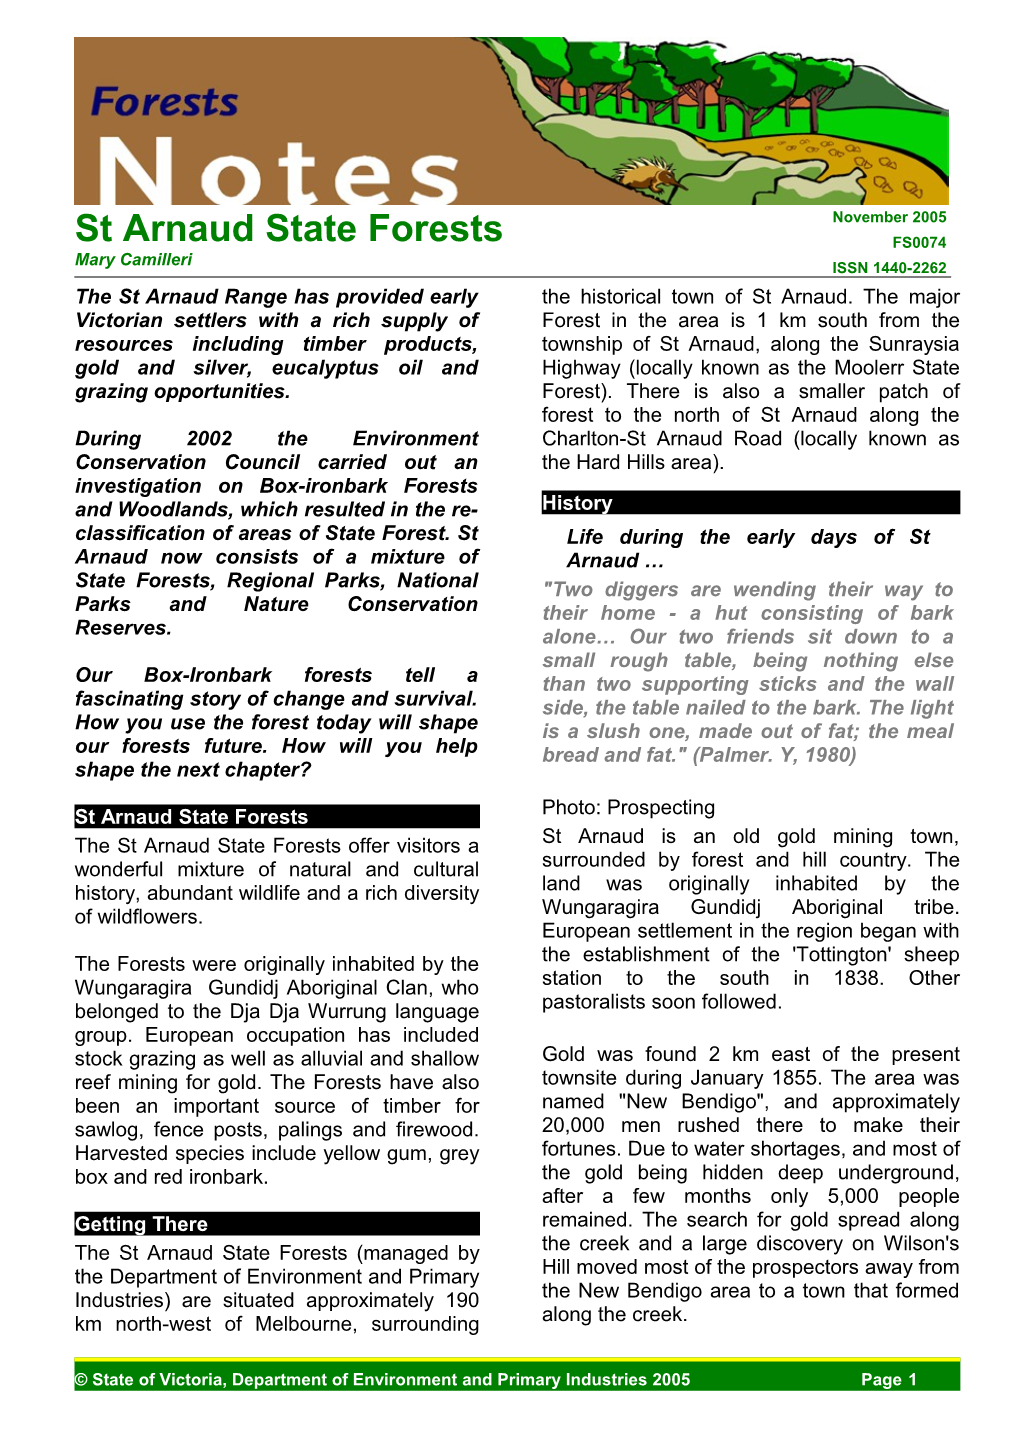 St Arnaud State Forests